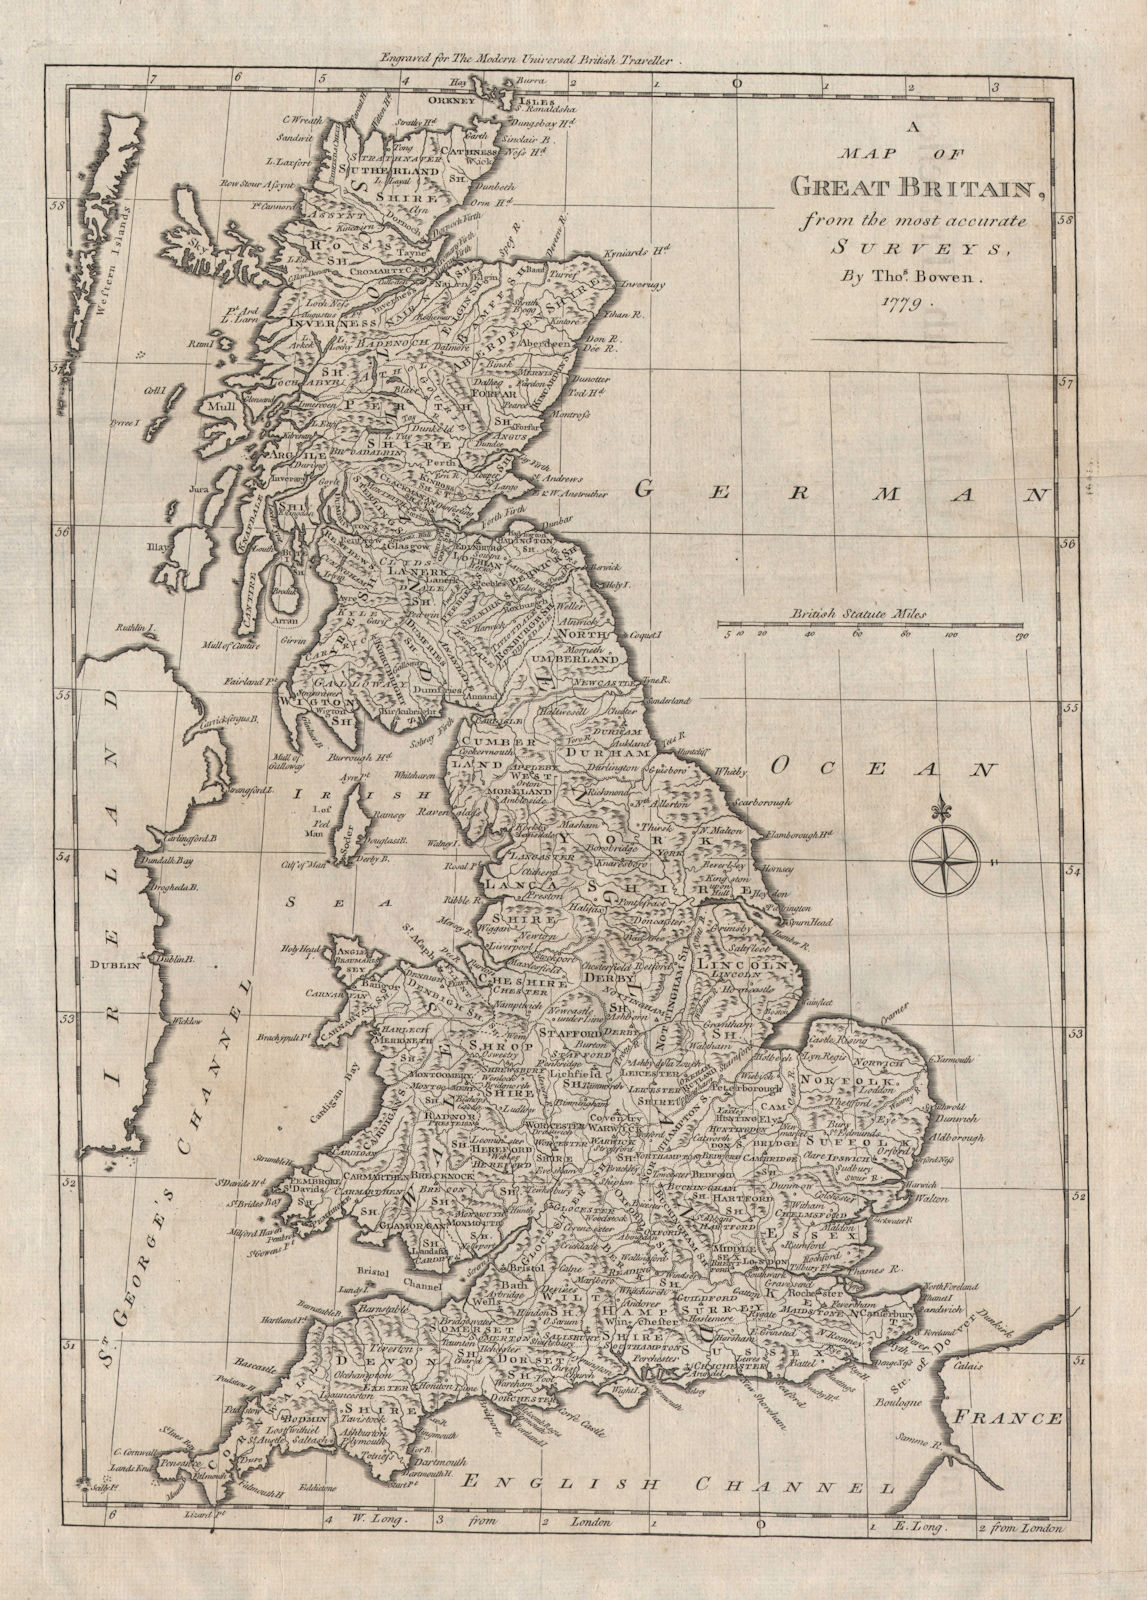 Associate Product A map of Great Britain from the most accurate surveys, by Thomas BOWEN 1779